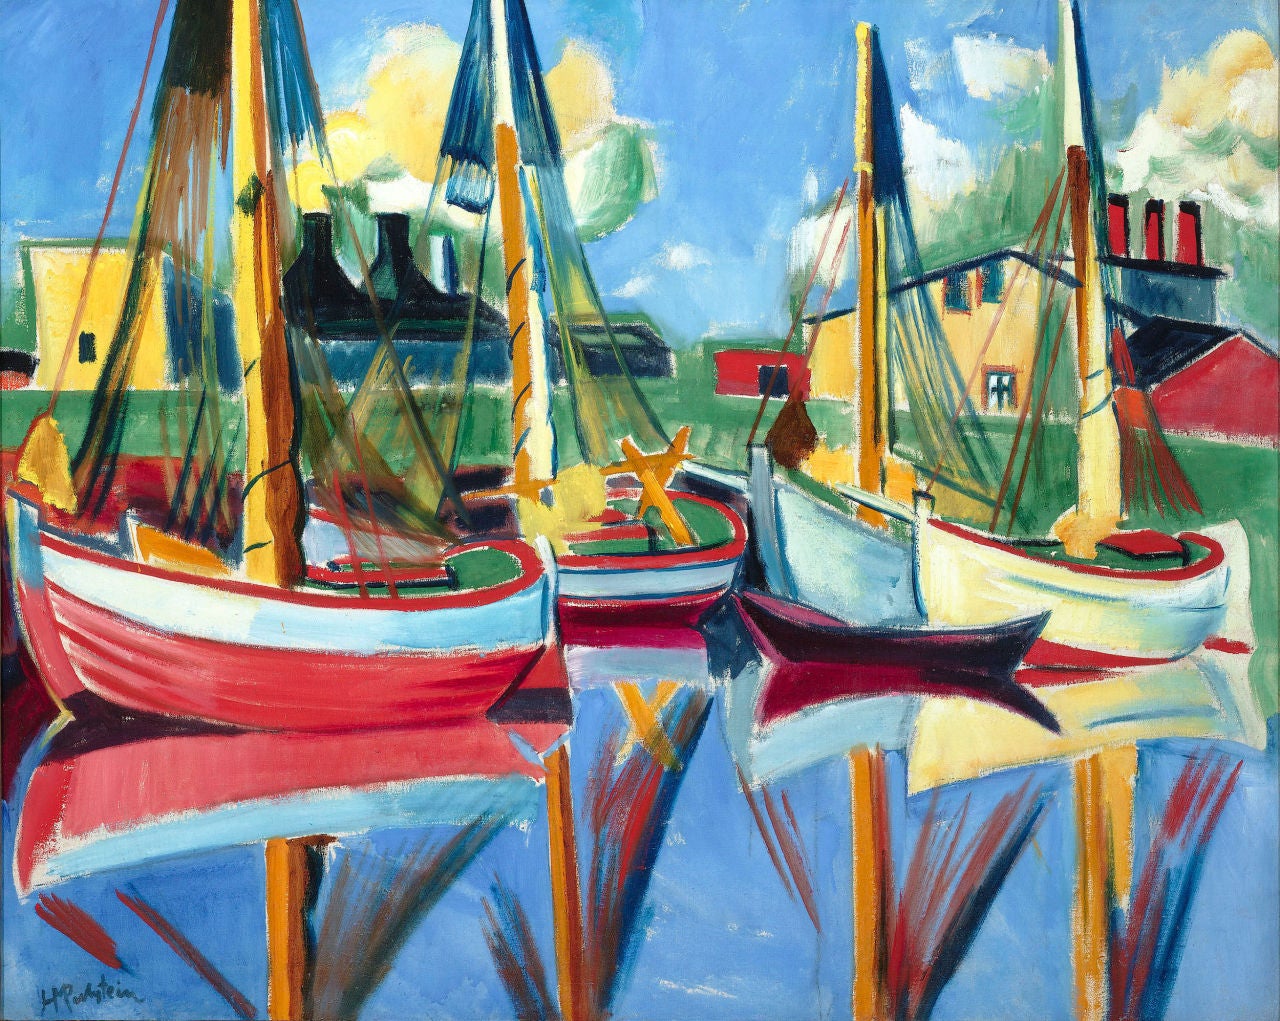 Fishing Boats in the Afternoon Sun by Max Pechstein 1